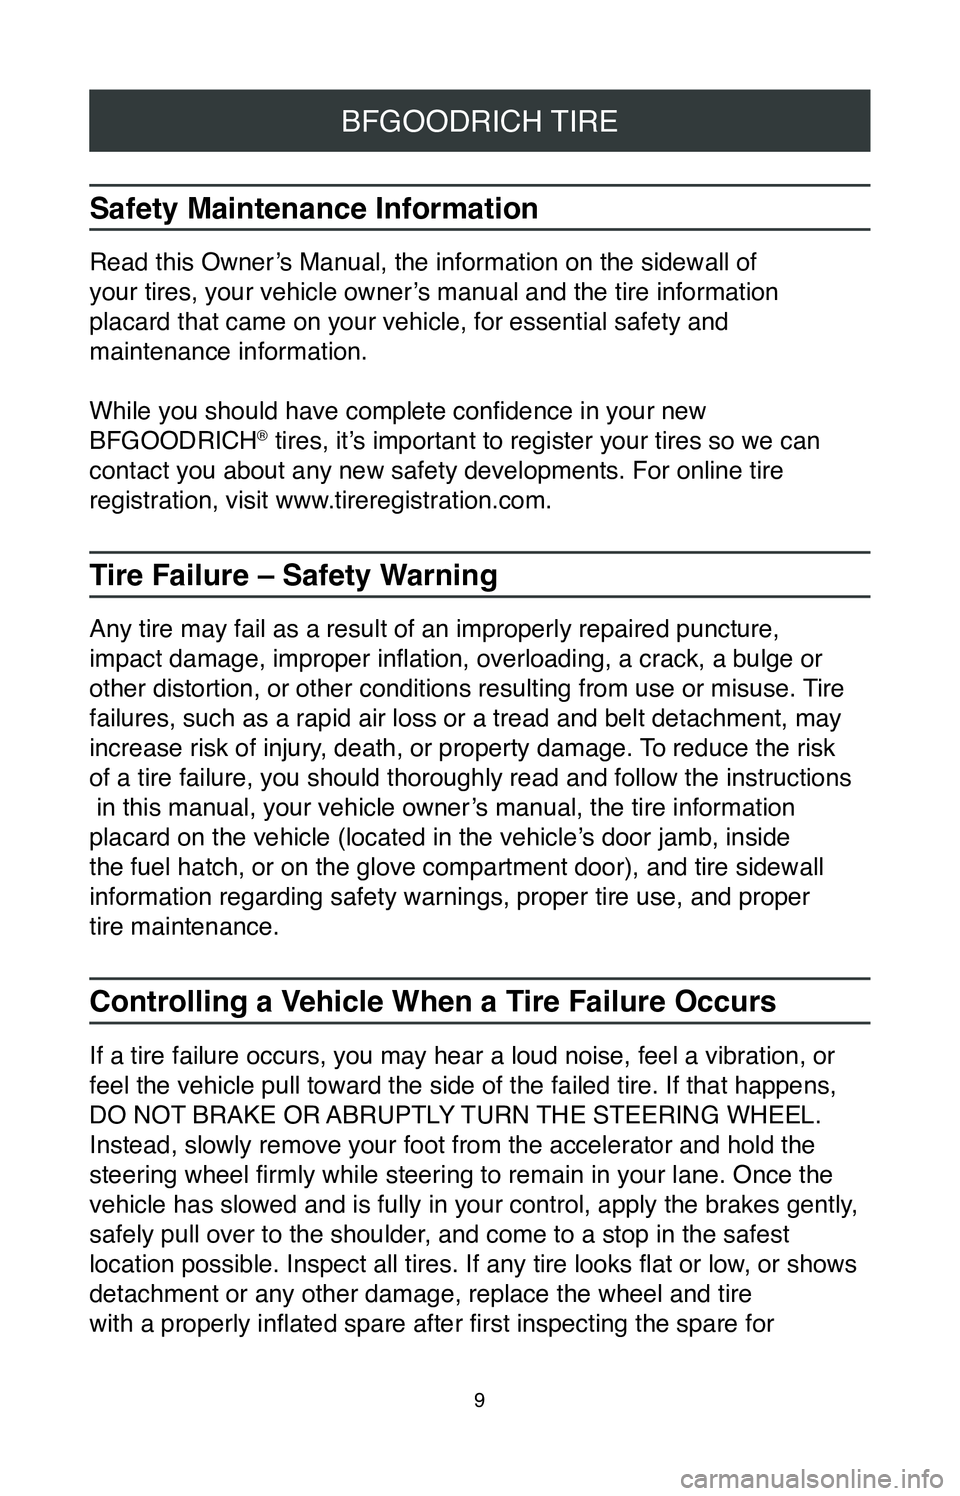 TOYOTA TACOMA 2020  Warranties & Maintenance Guides (in English) 9
BFGOODRICH TIRE
Safety Maintenance Information
Read this Owner’s Manual, the information on the sidewall of  
your tires, your vehicle owner’s manual and the tire information   
placard that cam